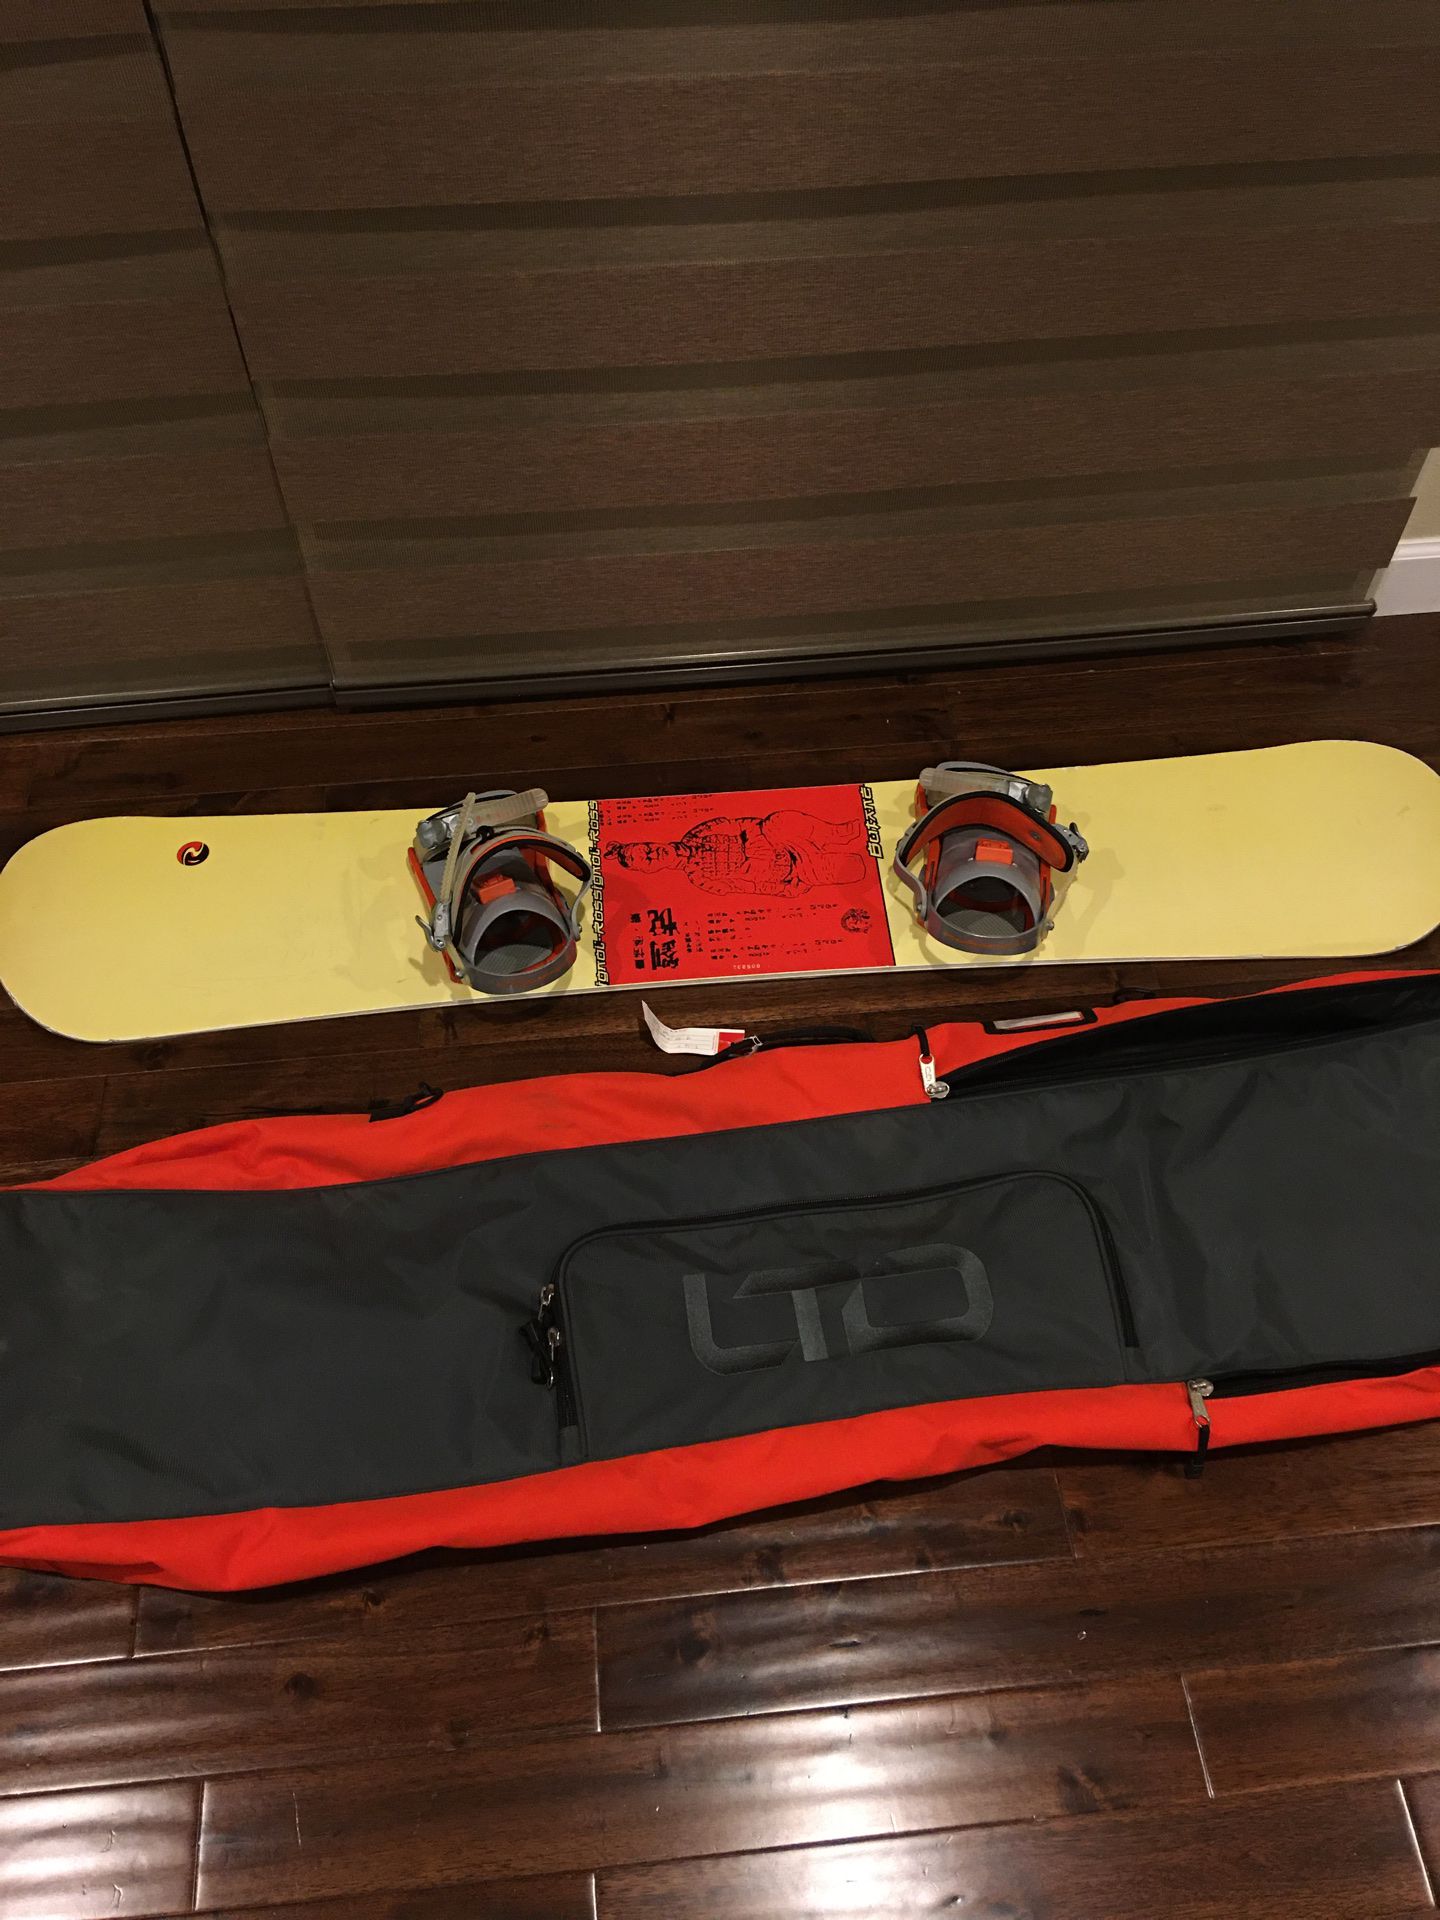 Rossignol 154 snowboard without bag